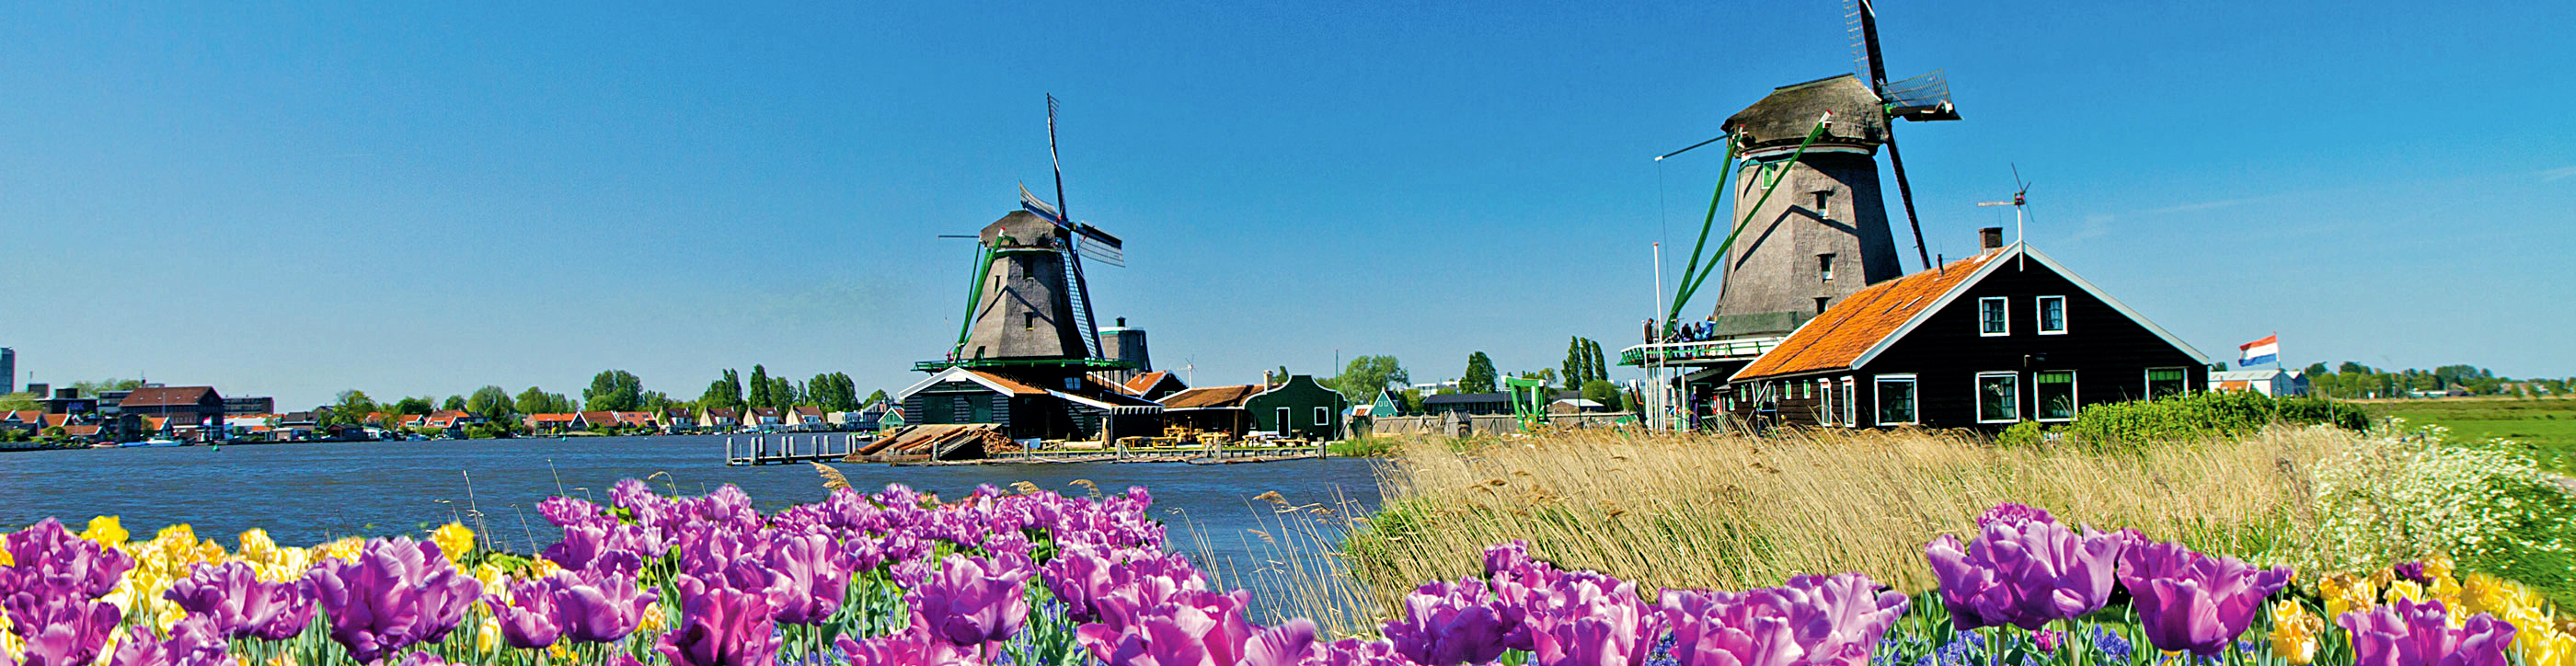 Tulips and Windmills